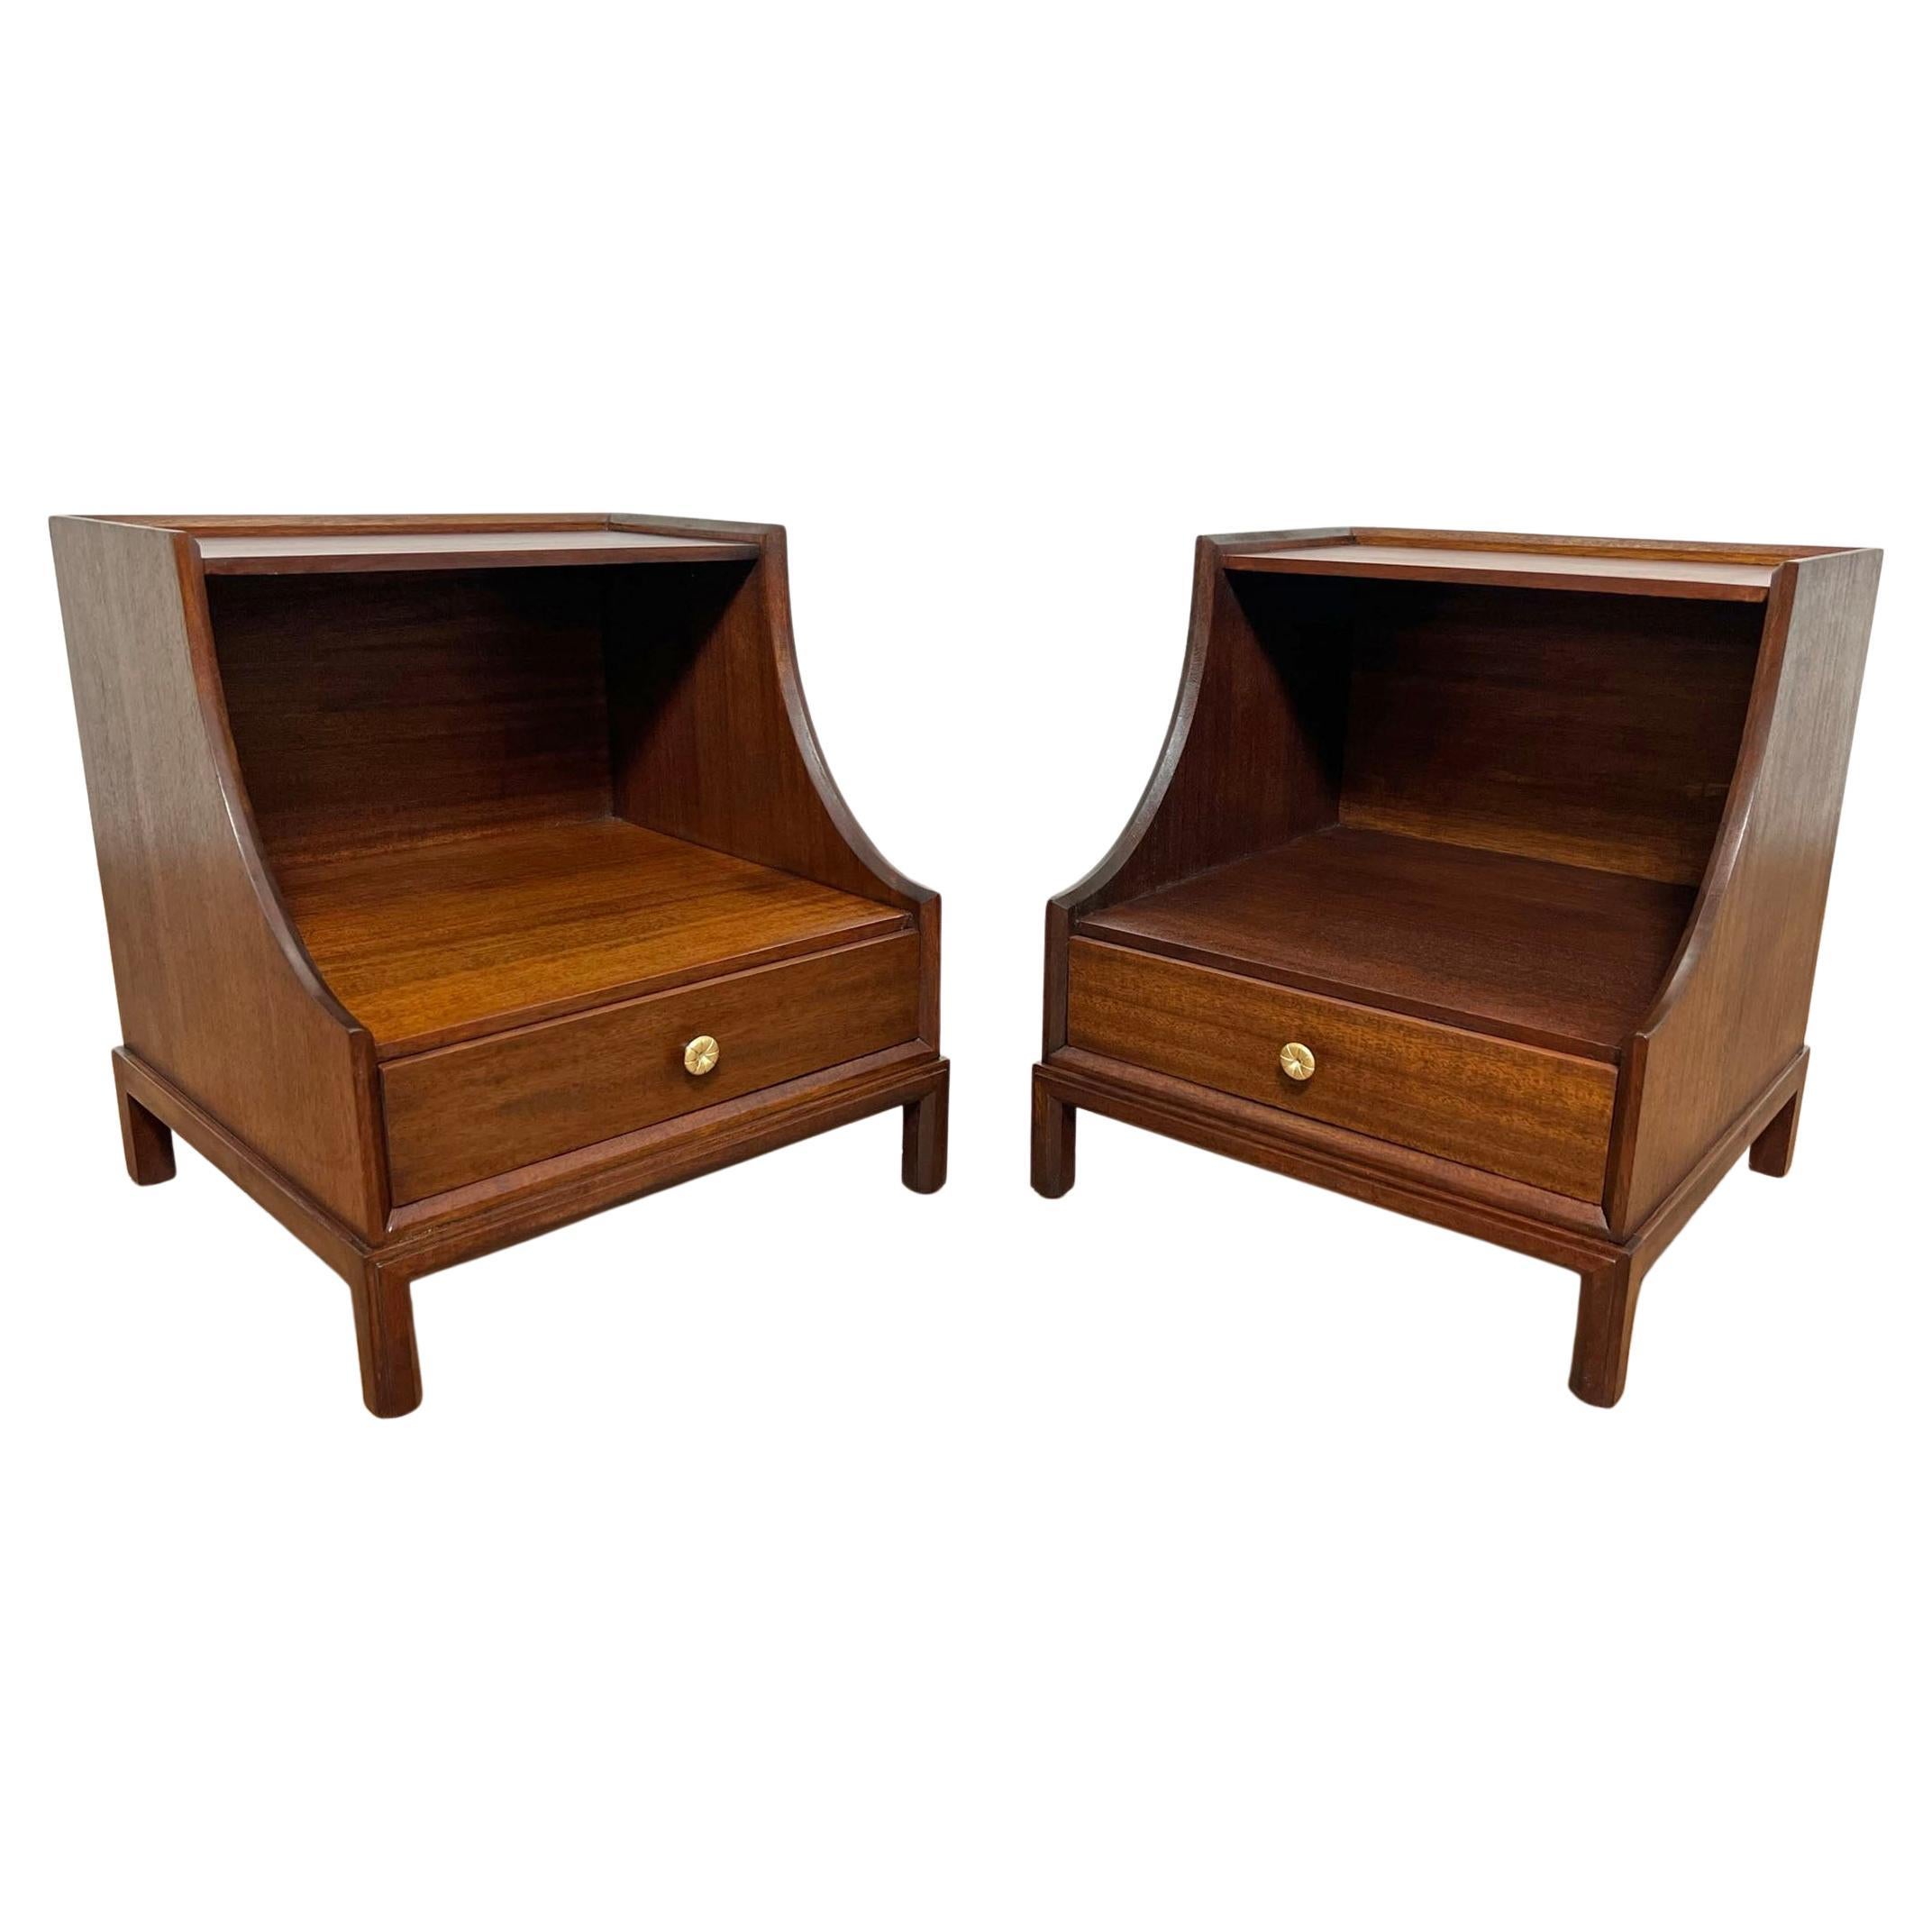 Pair of Tommi Parzinger for Charak Modern Night Stands, circa 1950s